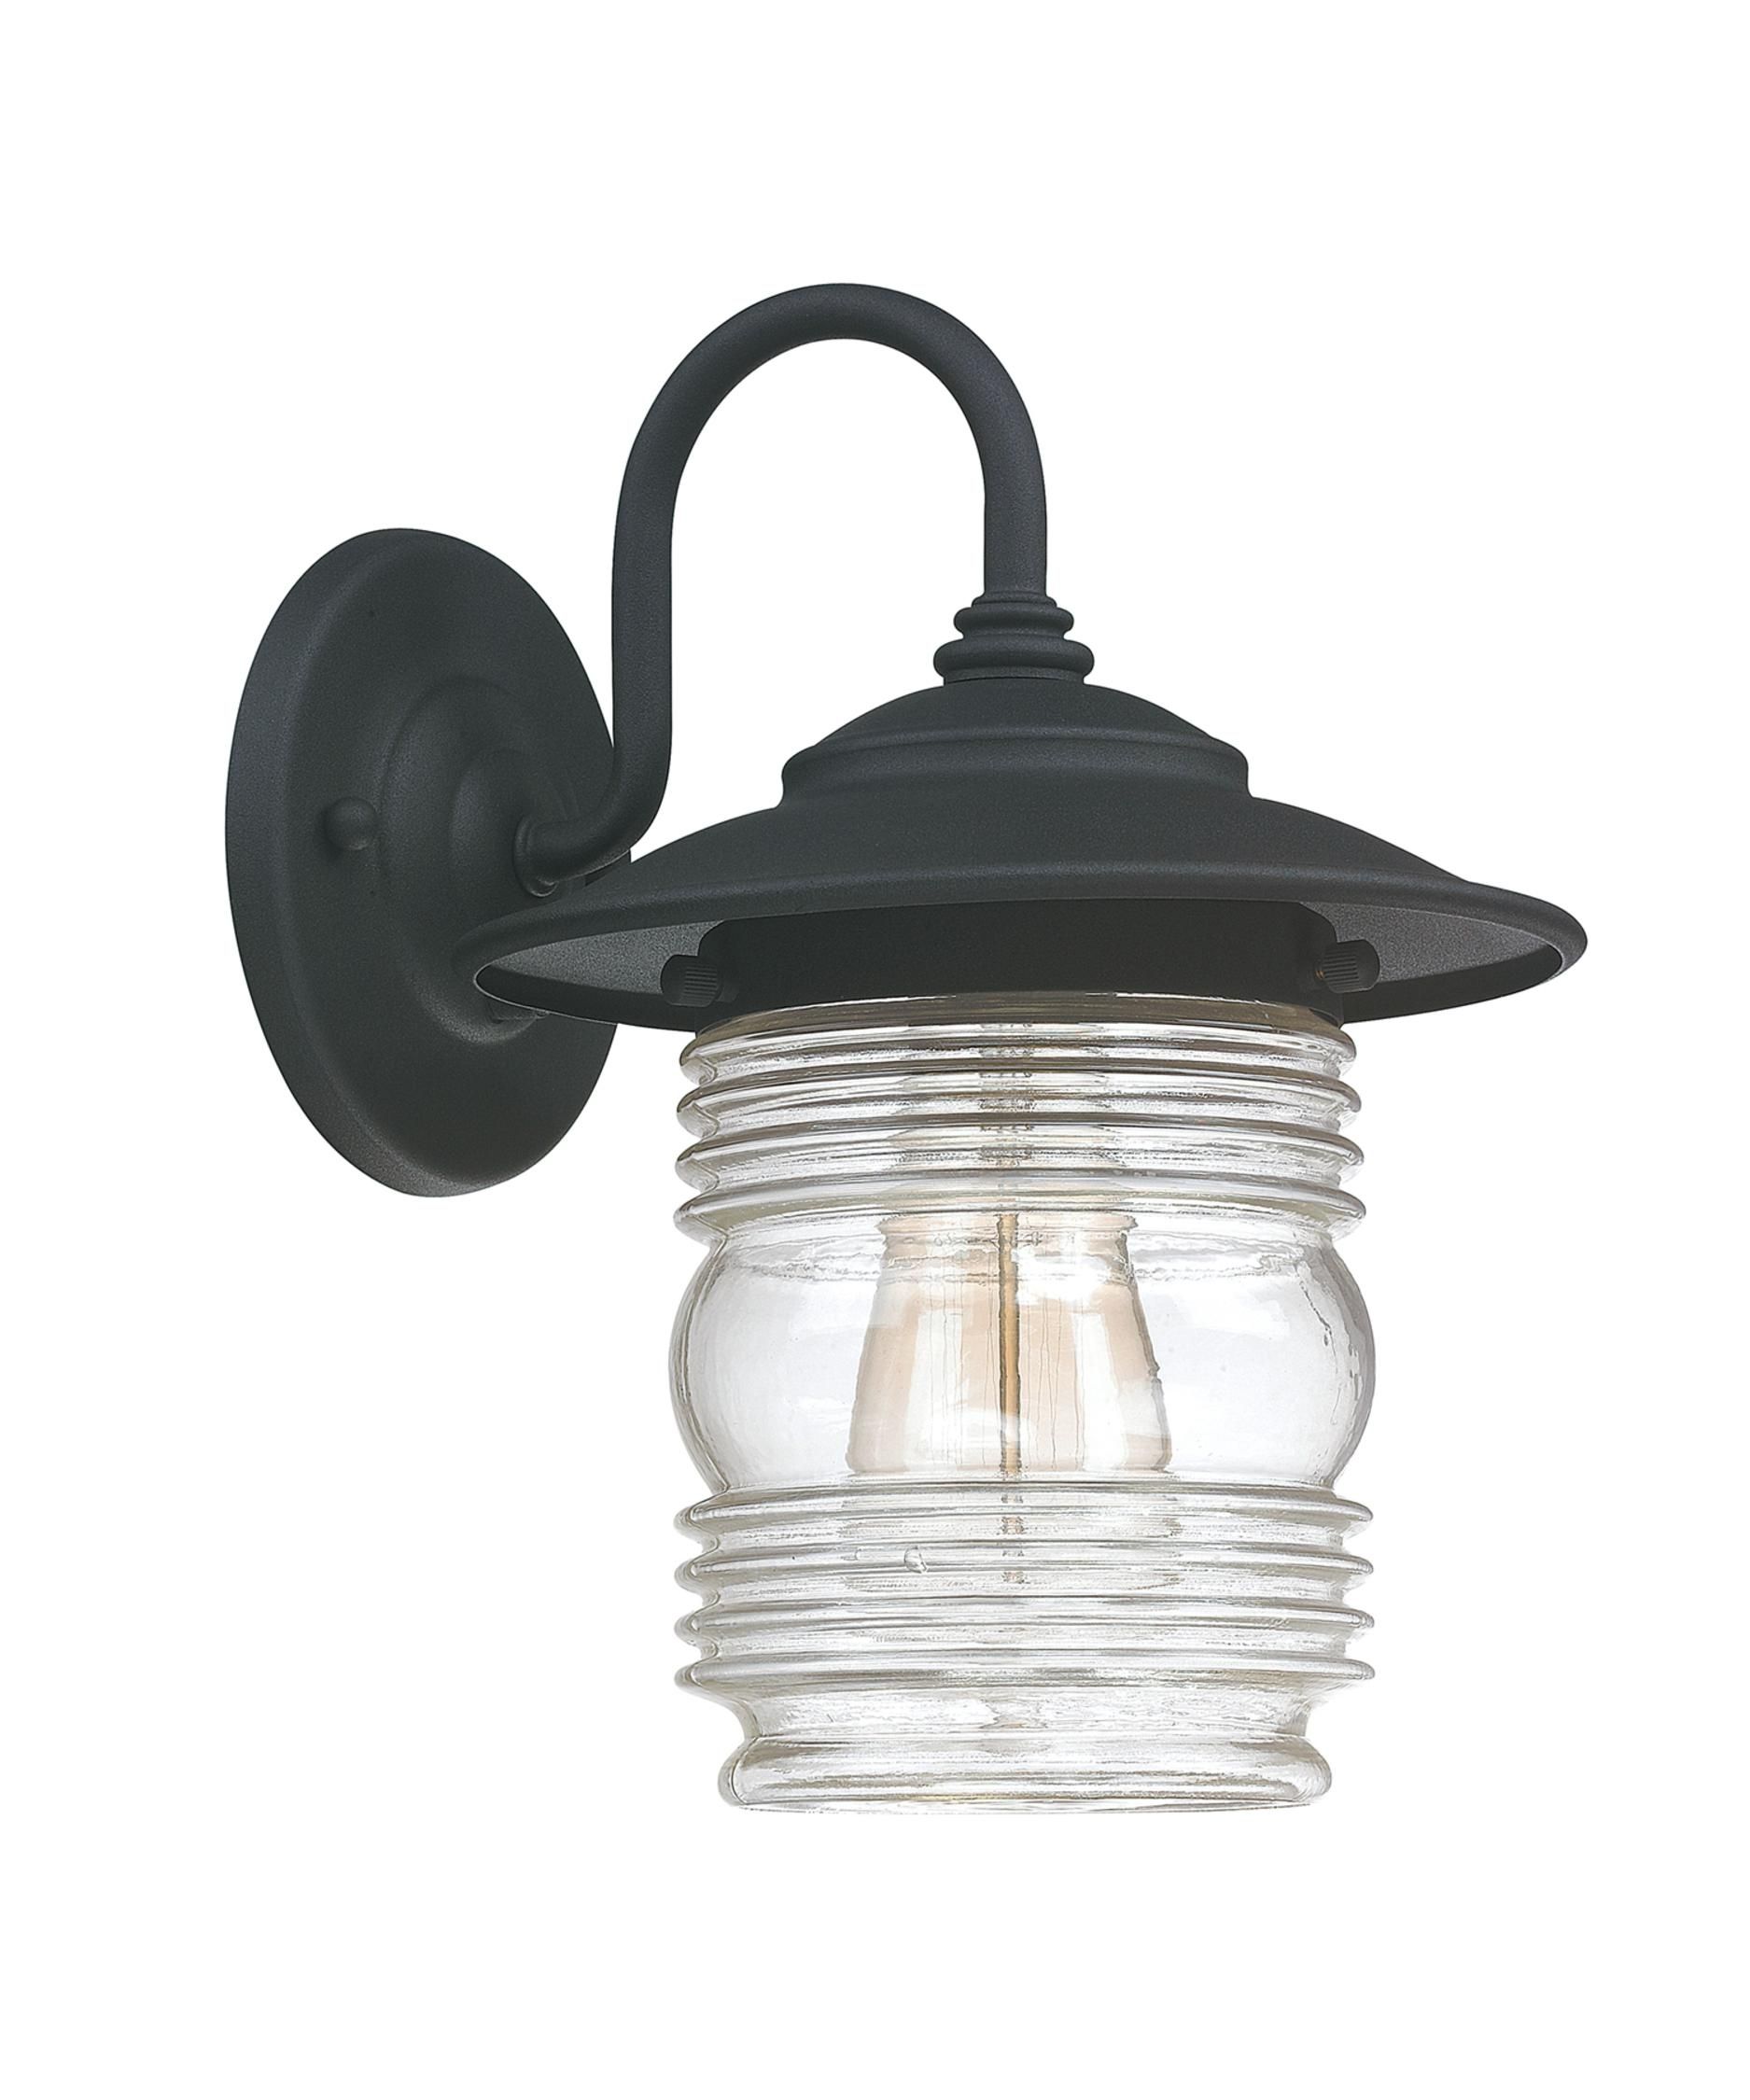 Capital Lighting 9671 Creekside 8 Inch Wide 1 Light Outdoor Wall With Antique Outdoor Wall Lights (View 13 of 15)